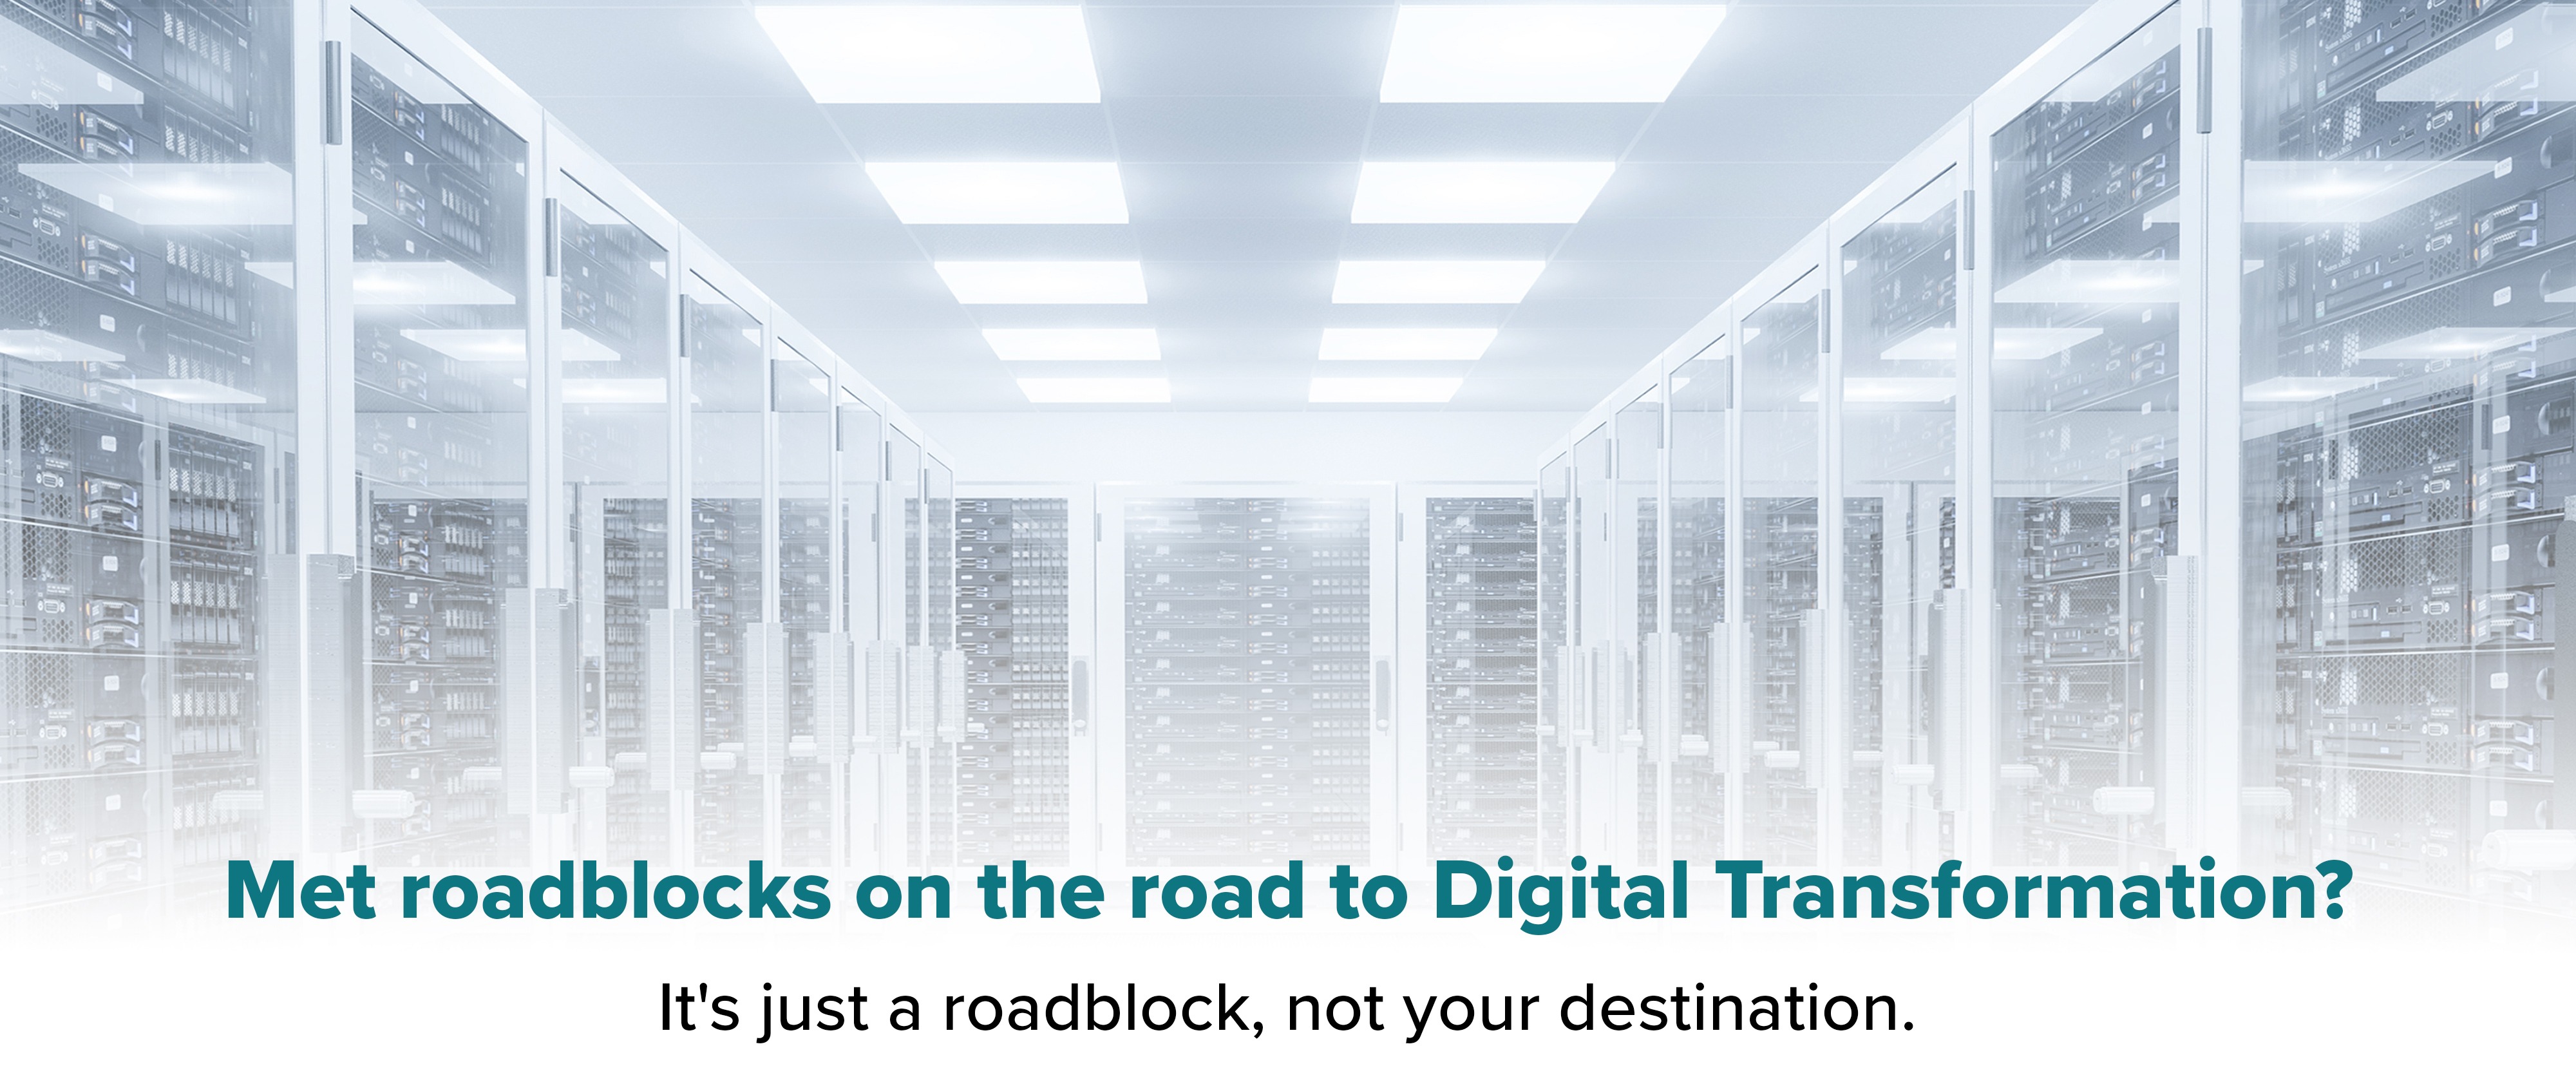 Old mainframe room. Text reads ' Met roadblocks on the road to Digital Transformation? It's just a roadblock, not your destination.'